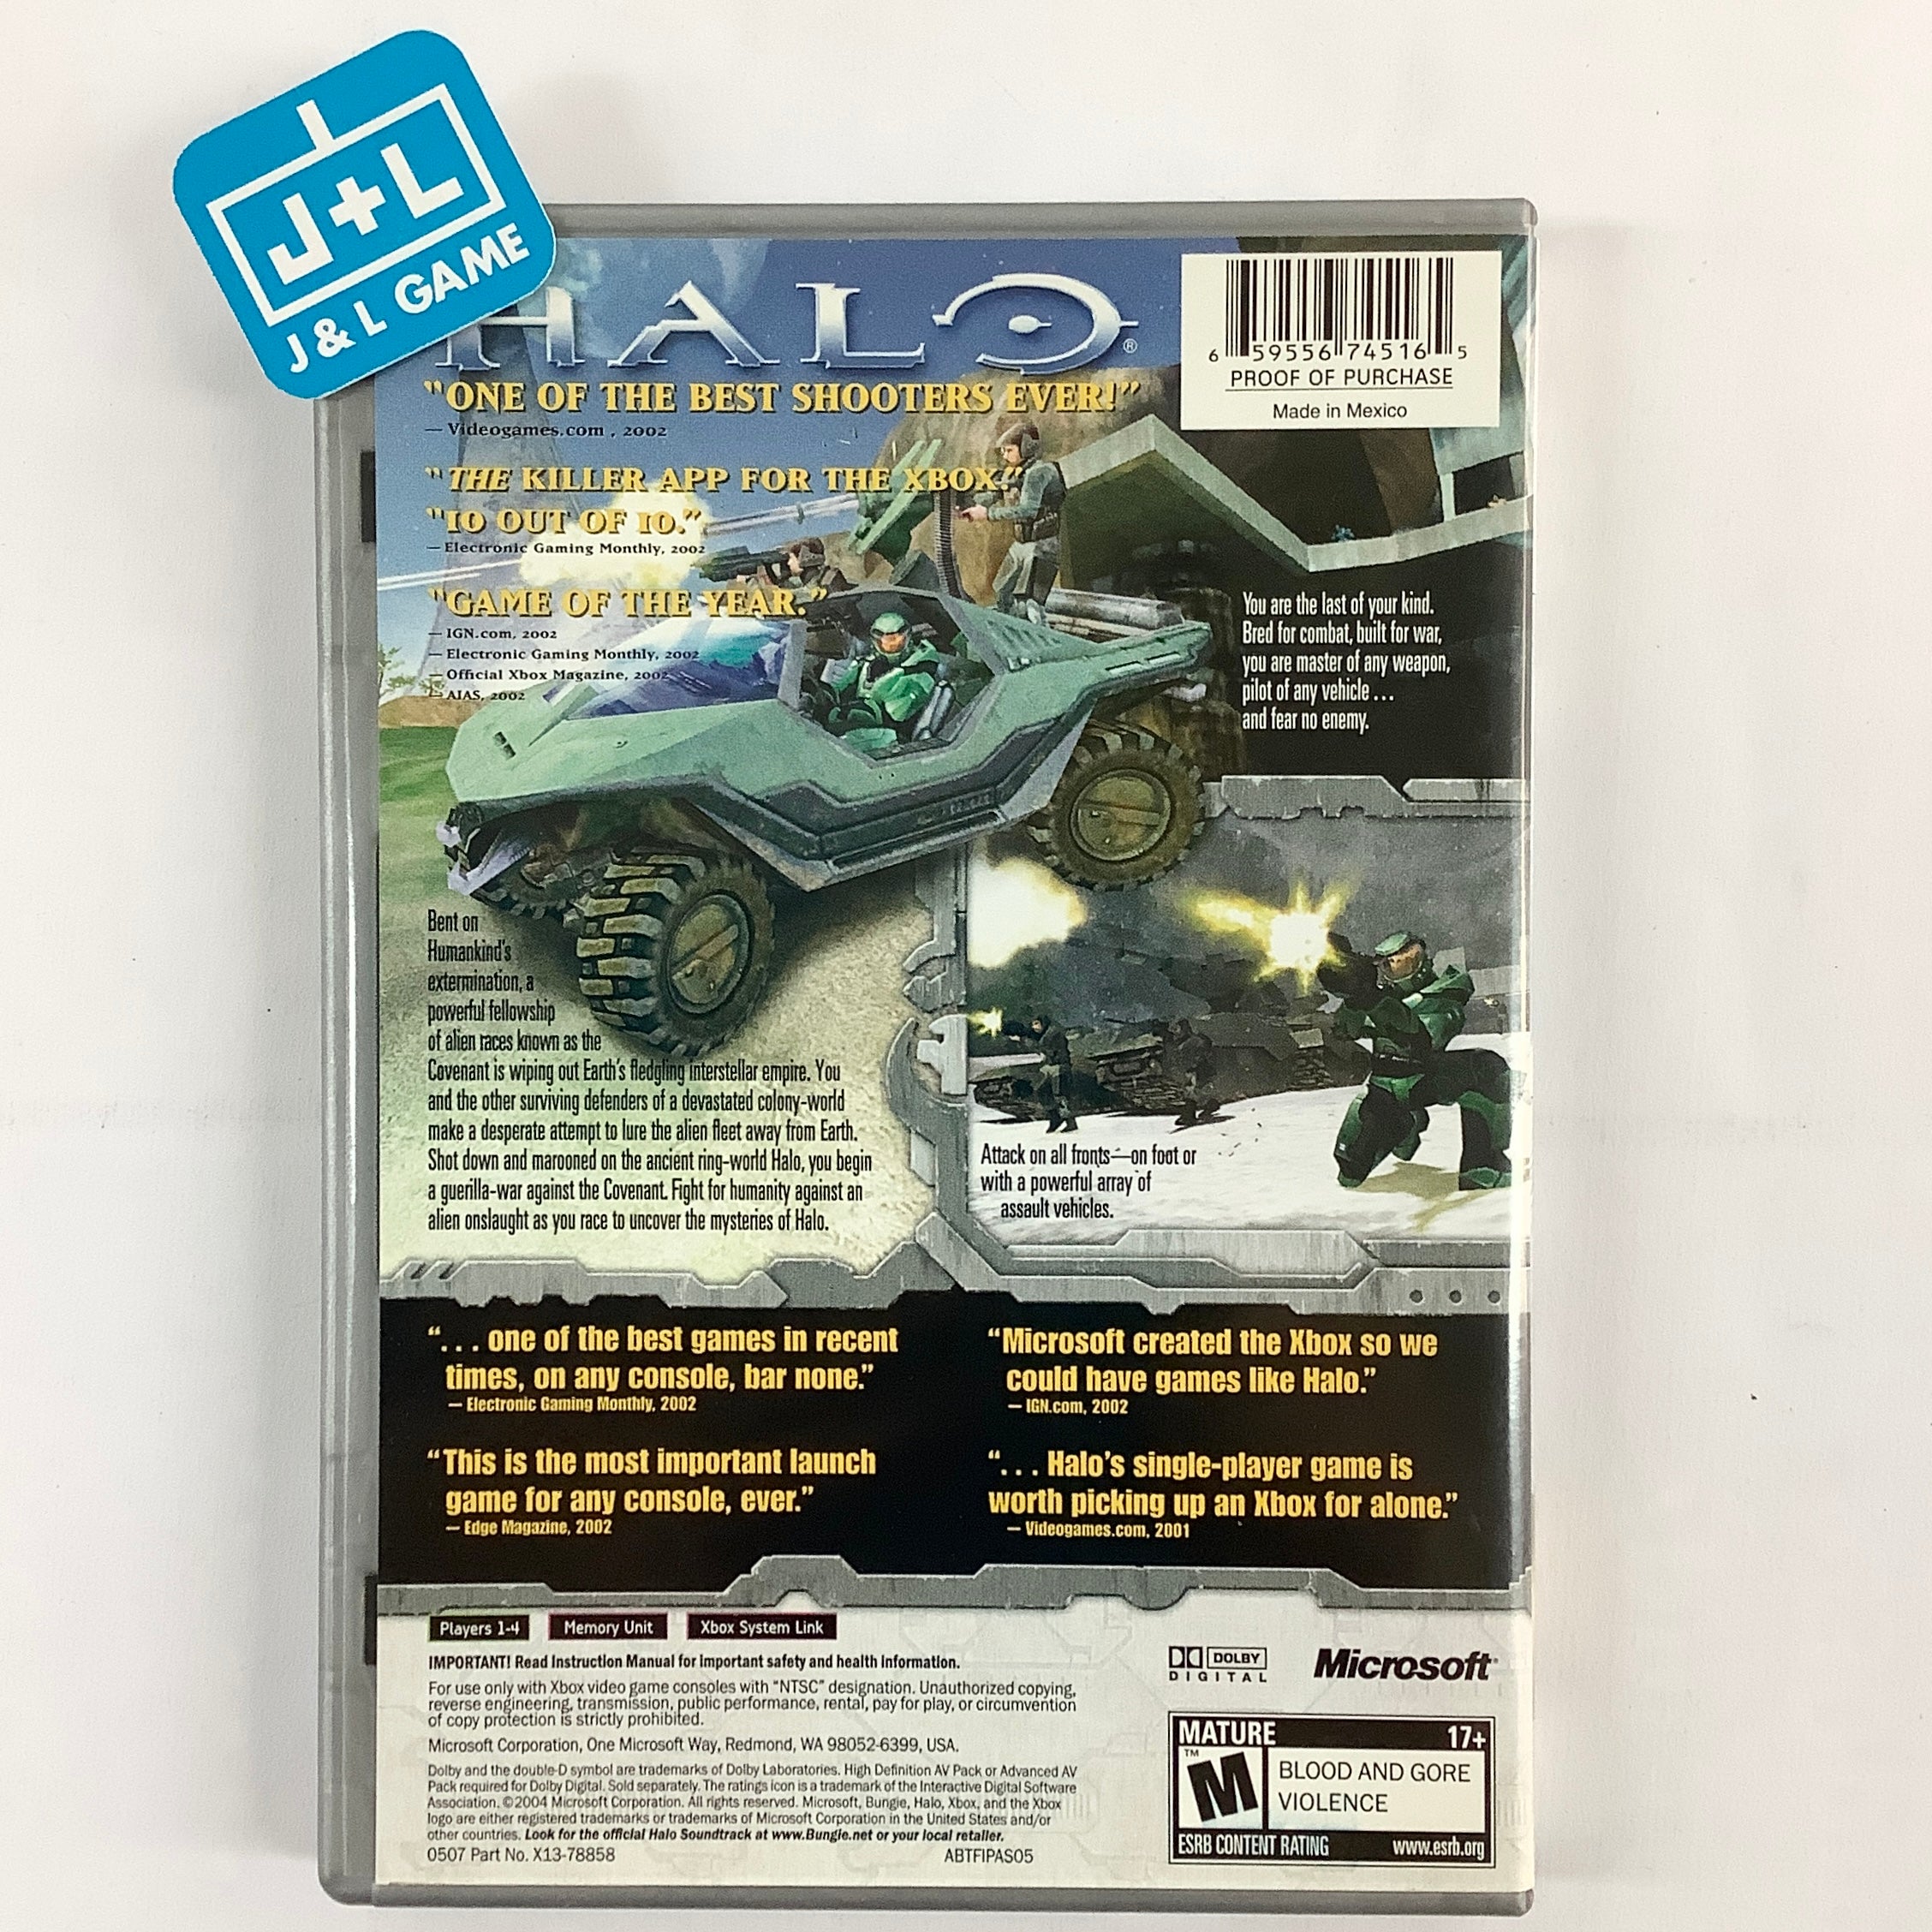 Halo: Combat Evolved (Platinum Hits) - (XB) Xbox [Pre-Owned] Video Games Microsoft Game Studios   